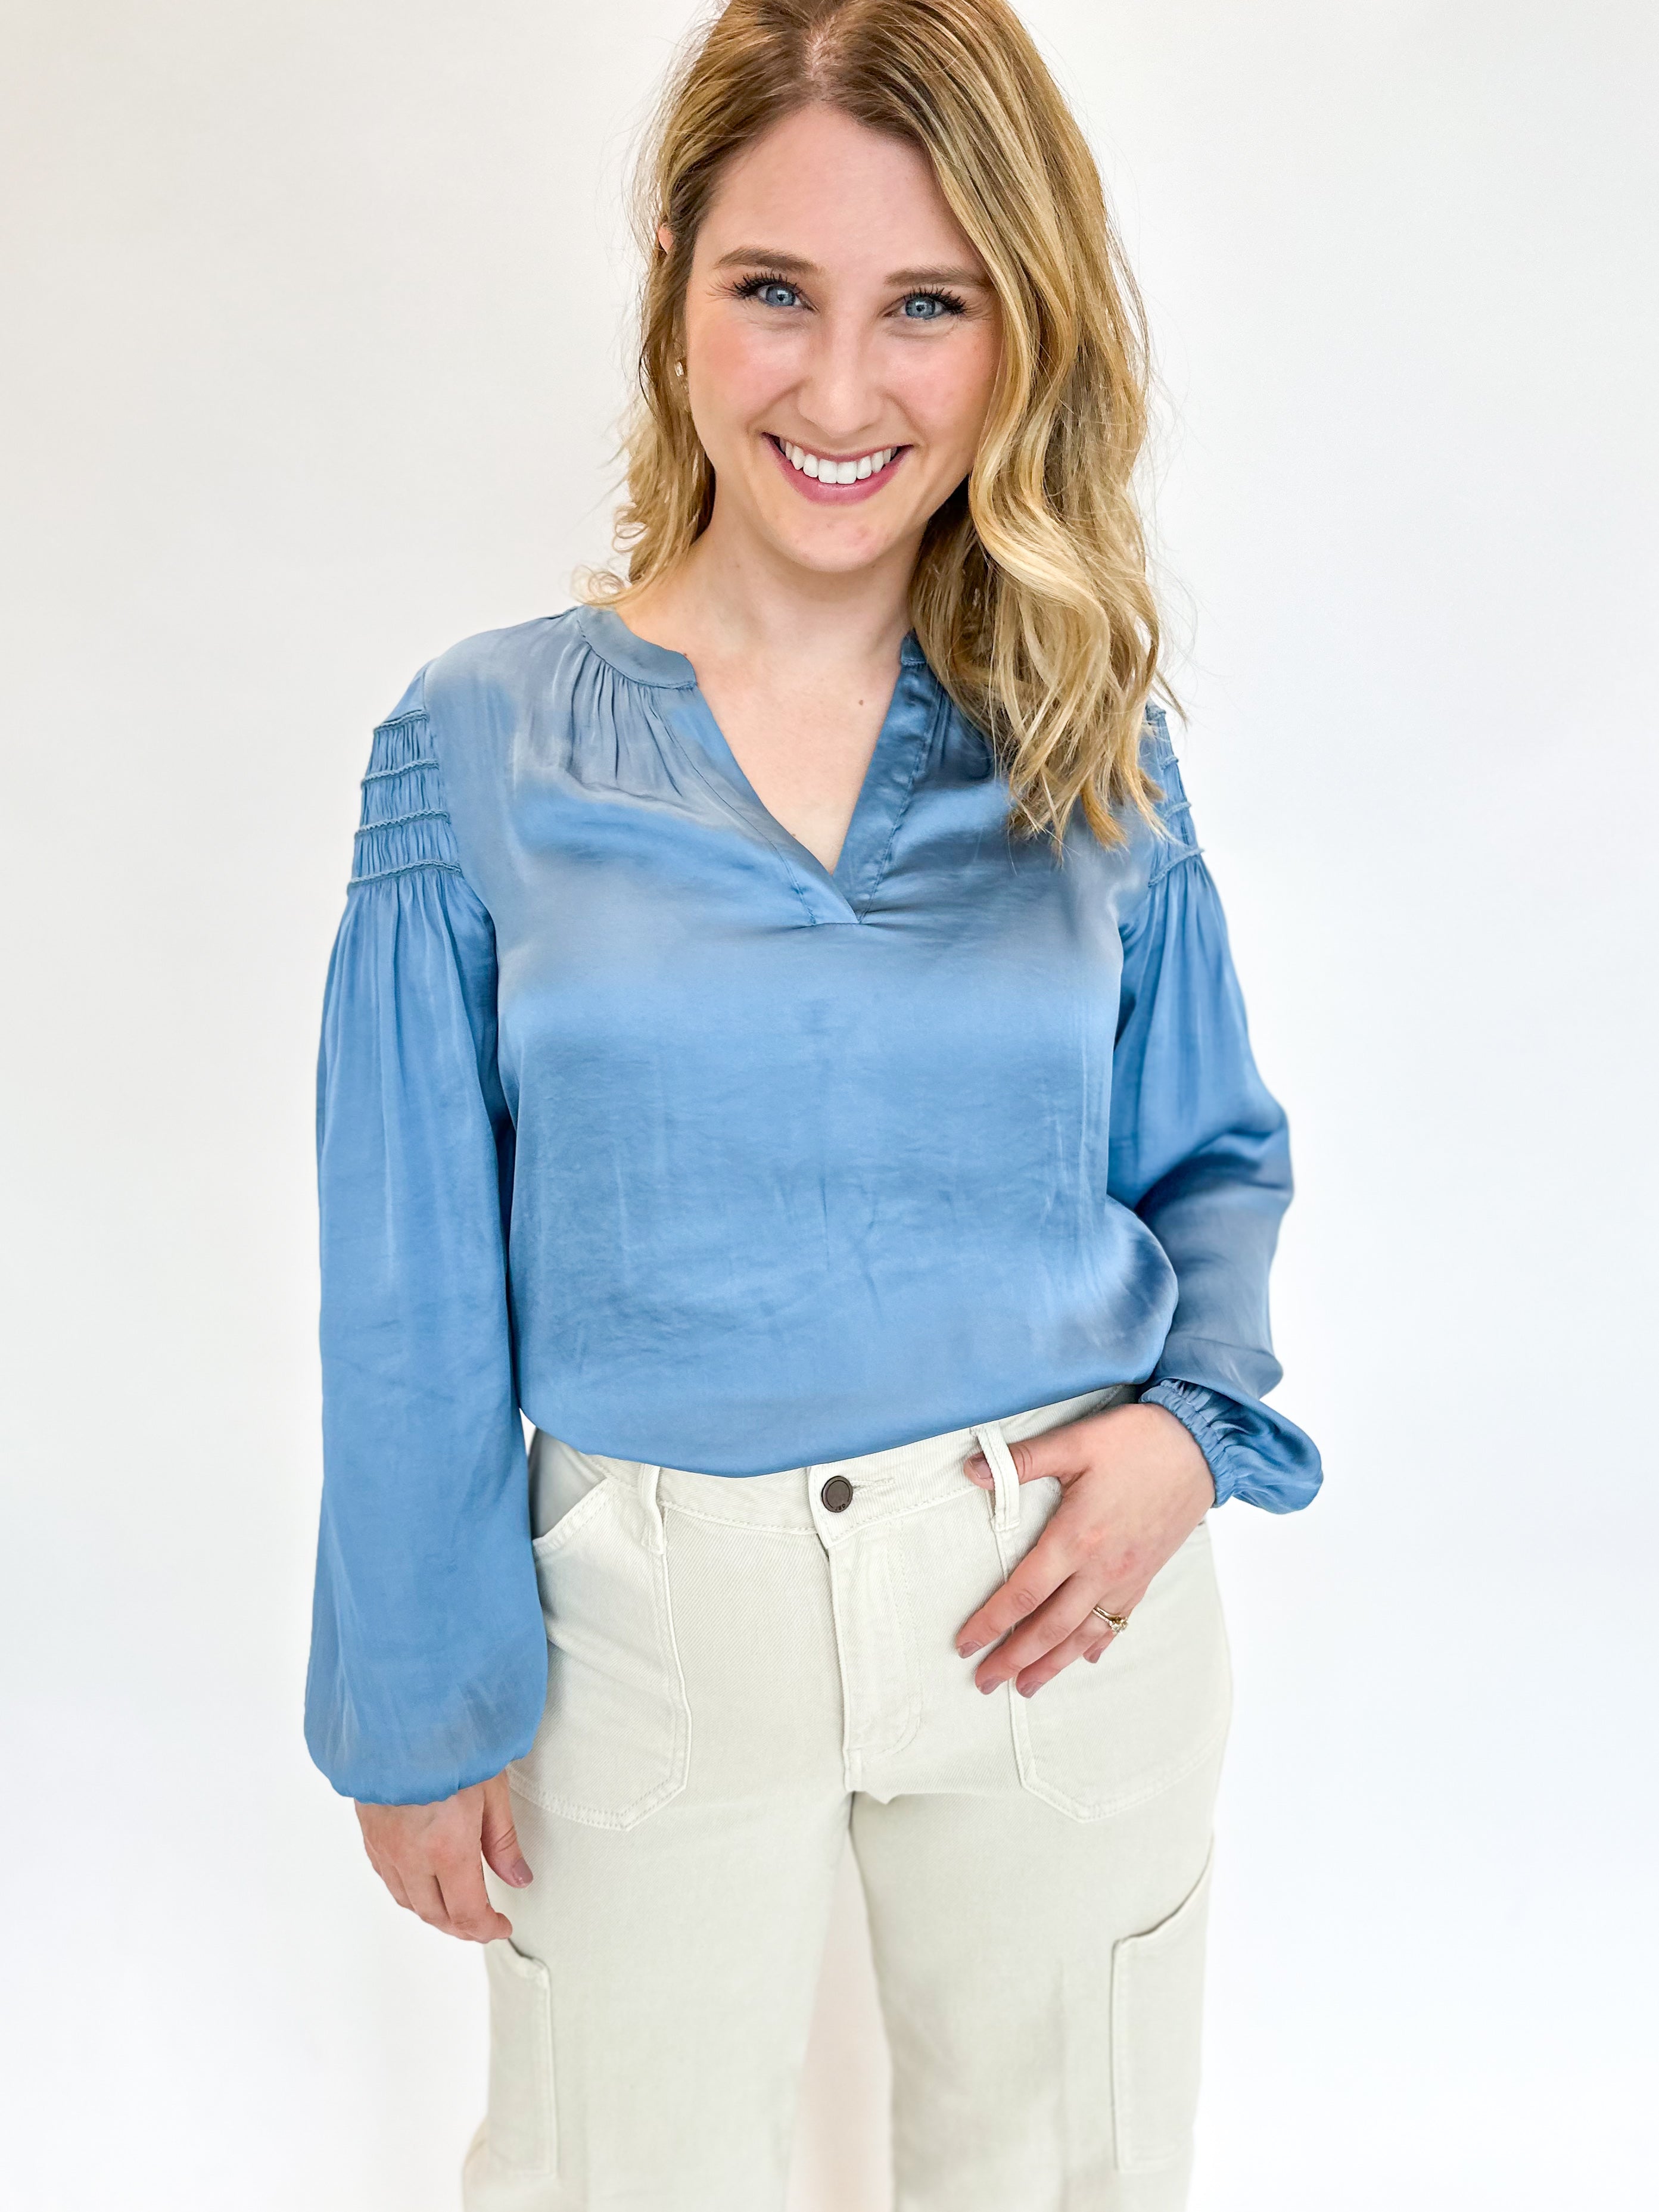 Dusty Sky Blouse-200 Fashion Blouses-CURRENT AIR CLOTHING-July & June Women's Fashion Boutique Located in San Antonio, Texas